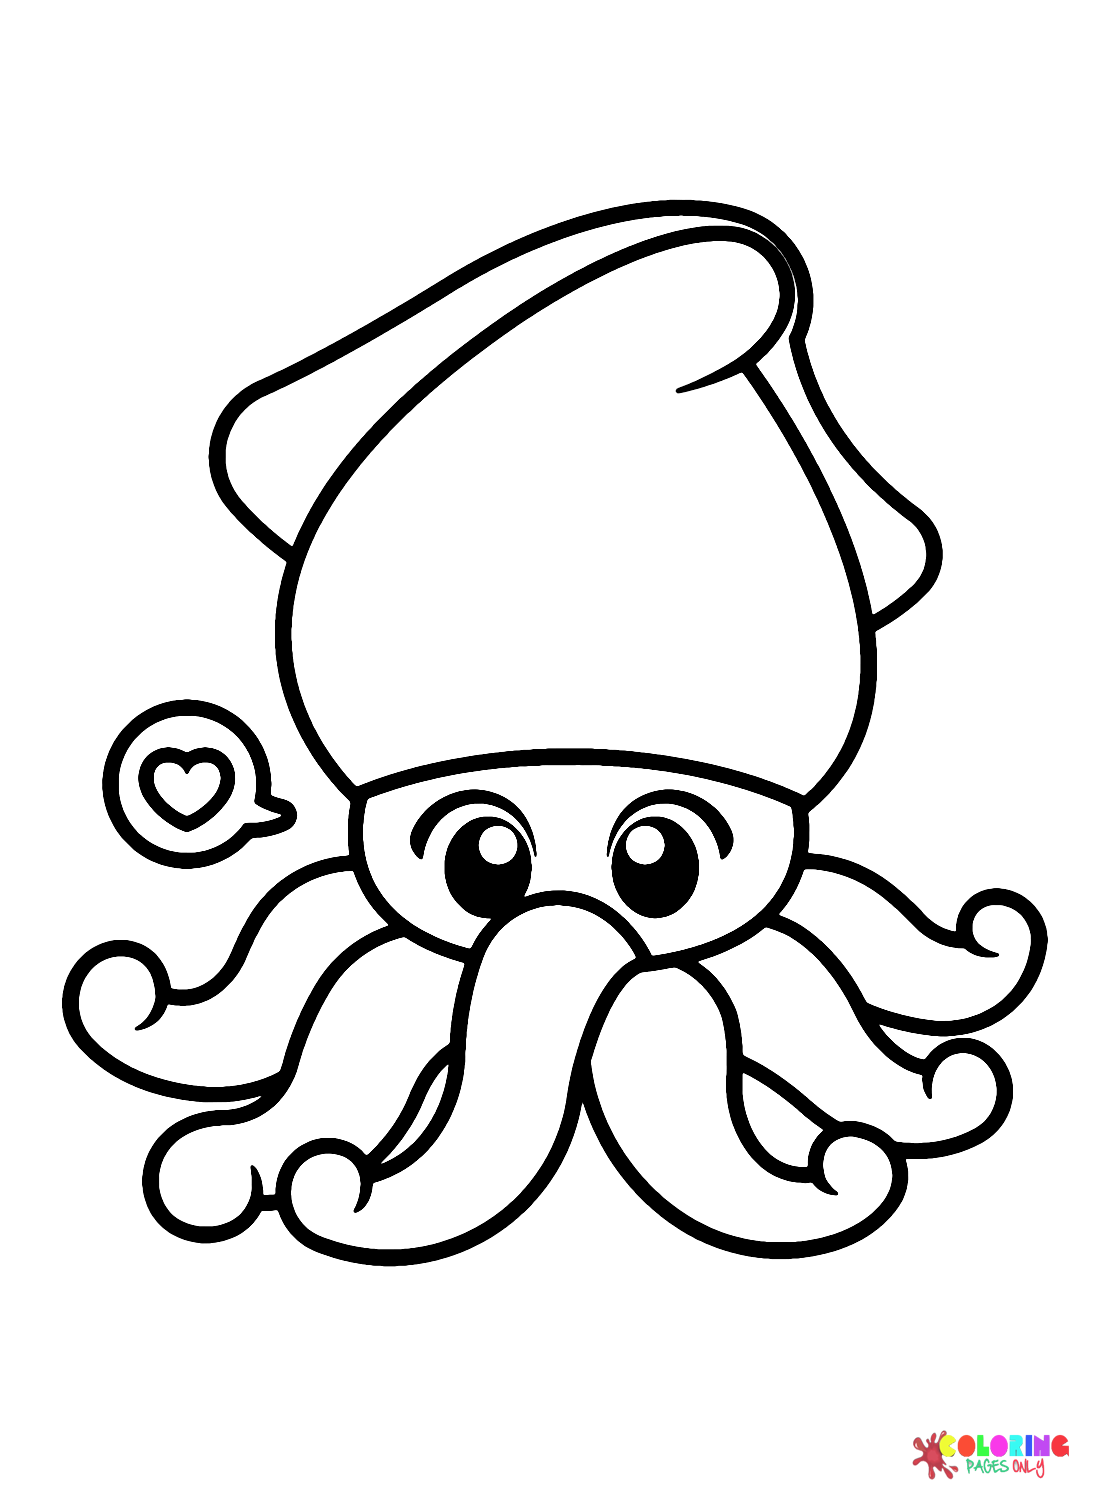 Cute Cuttlefish Cartoon Coloring Page